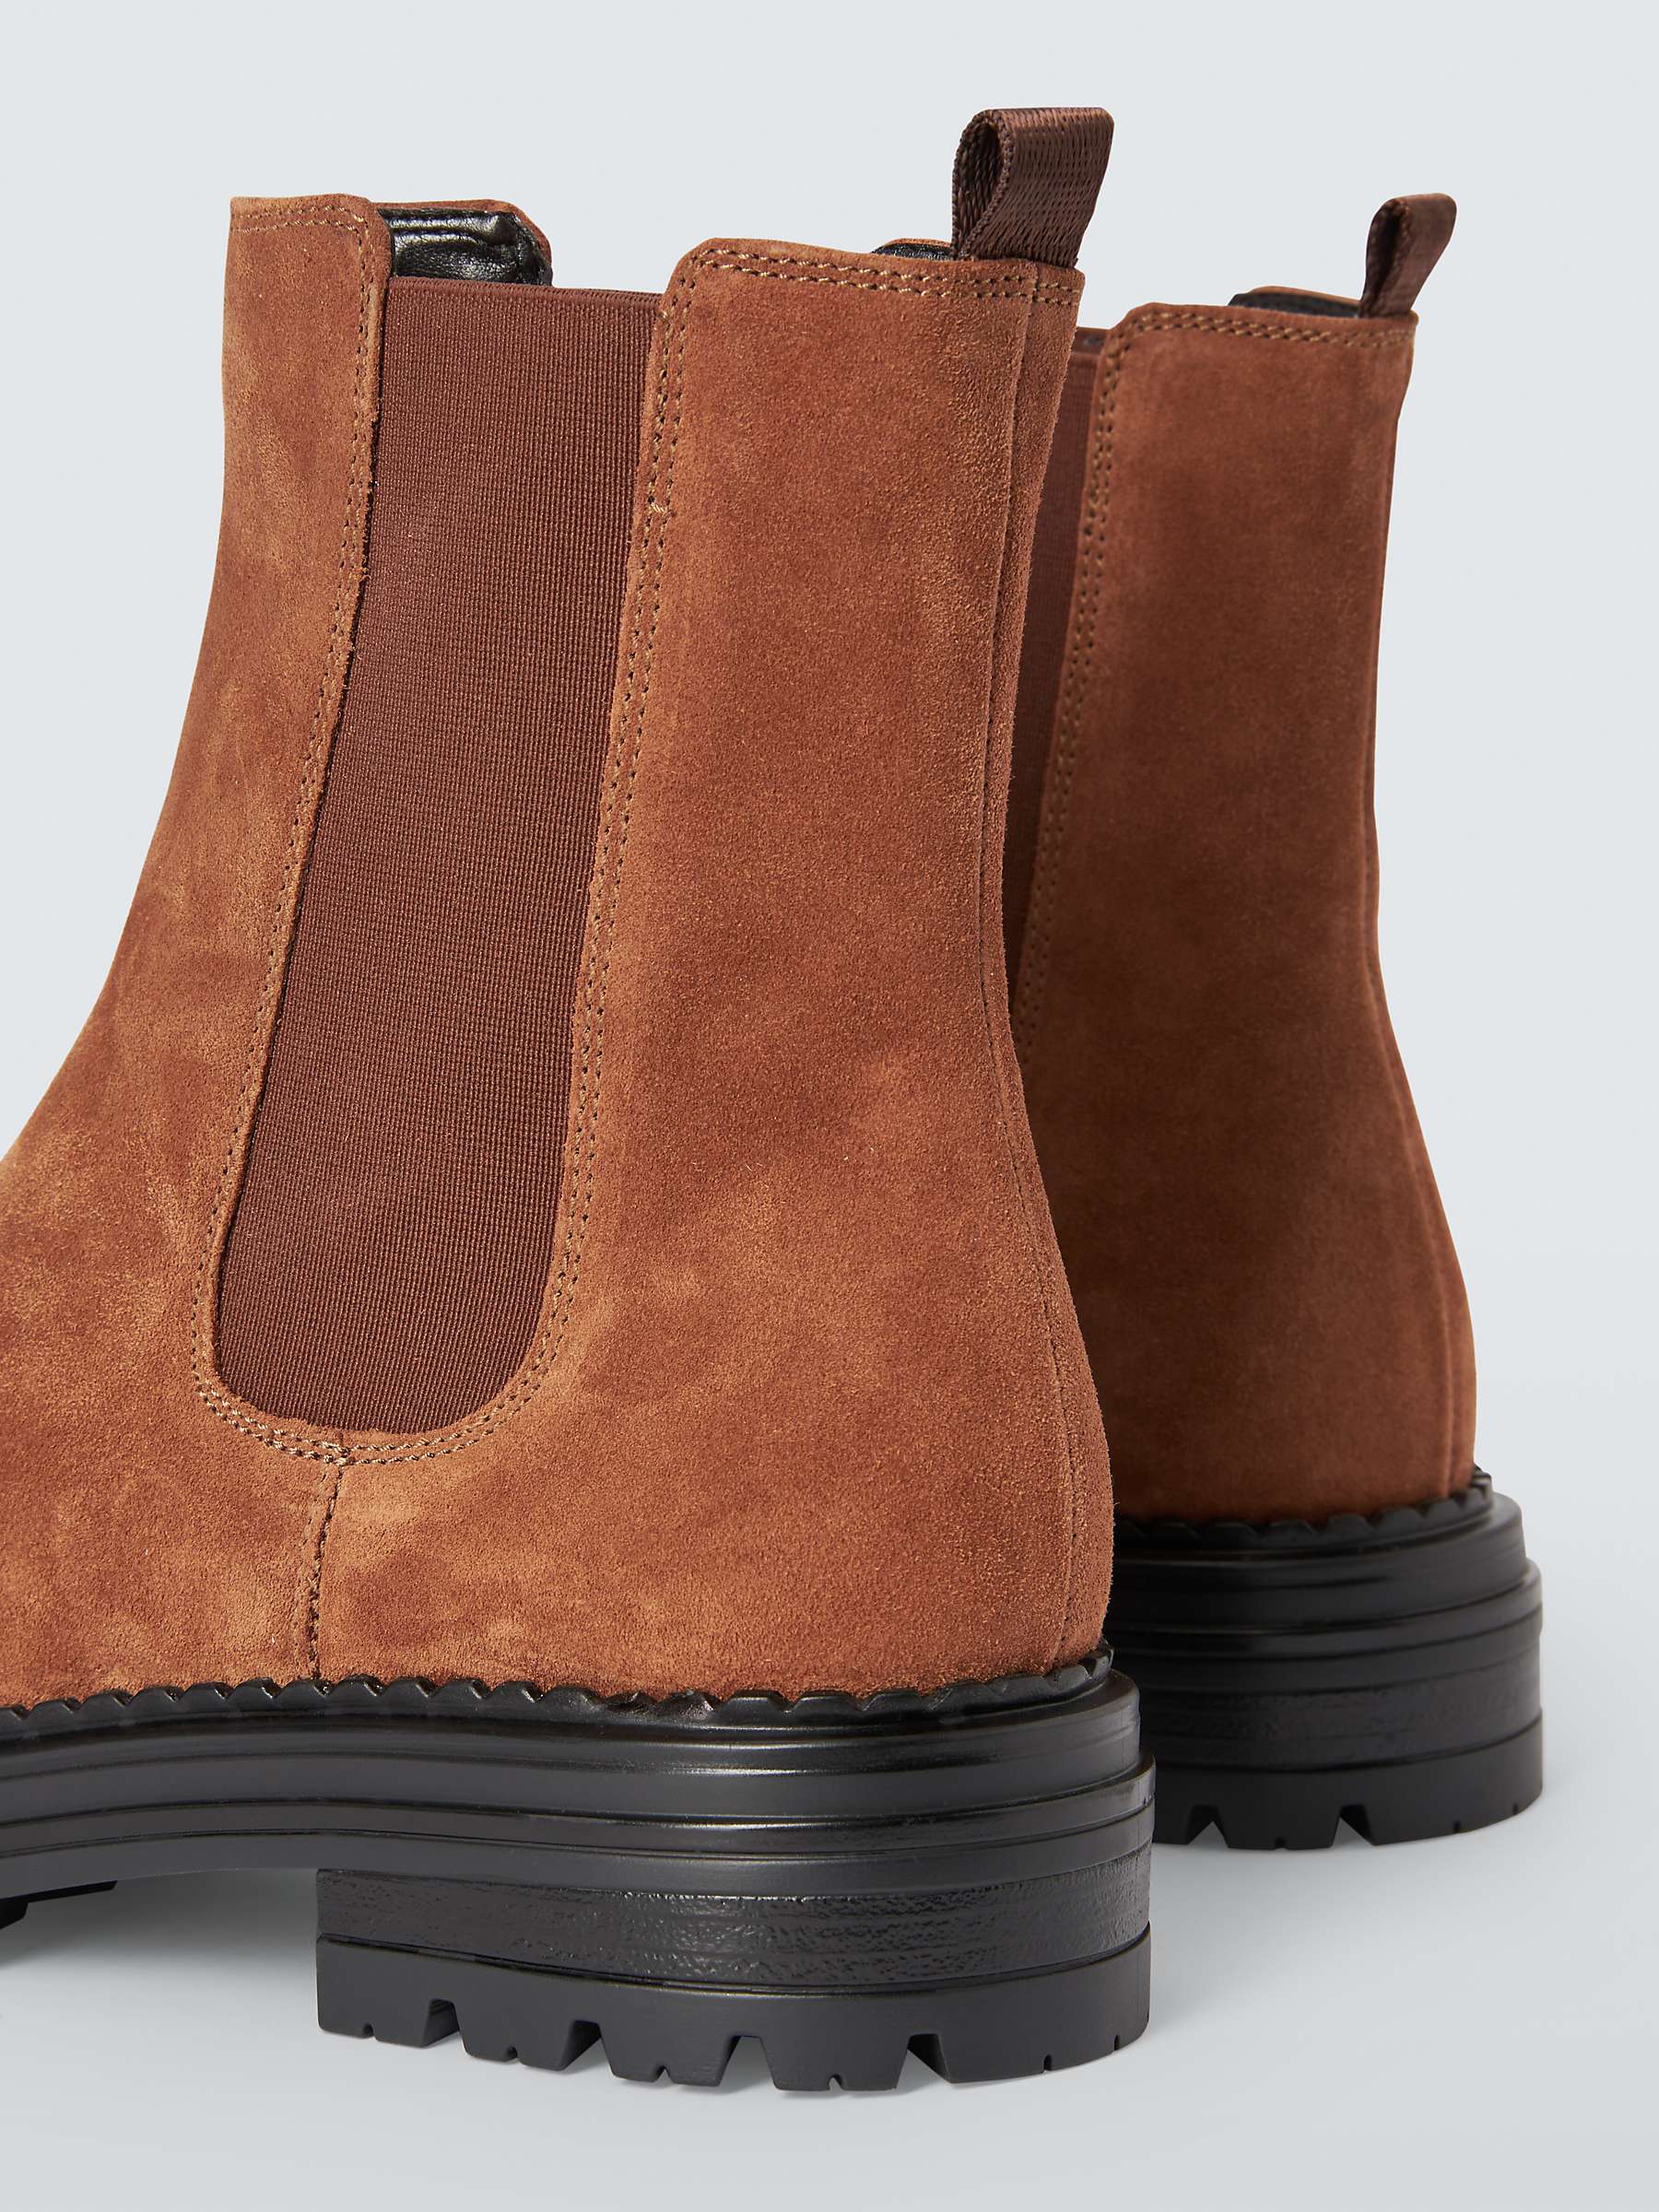 Buy John Lewis Poppie Suede Cleated Sole High Cut Chelsea Boots, Tan Online at johnlewis.com